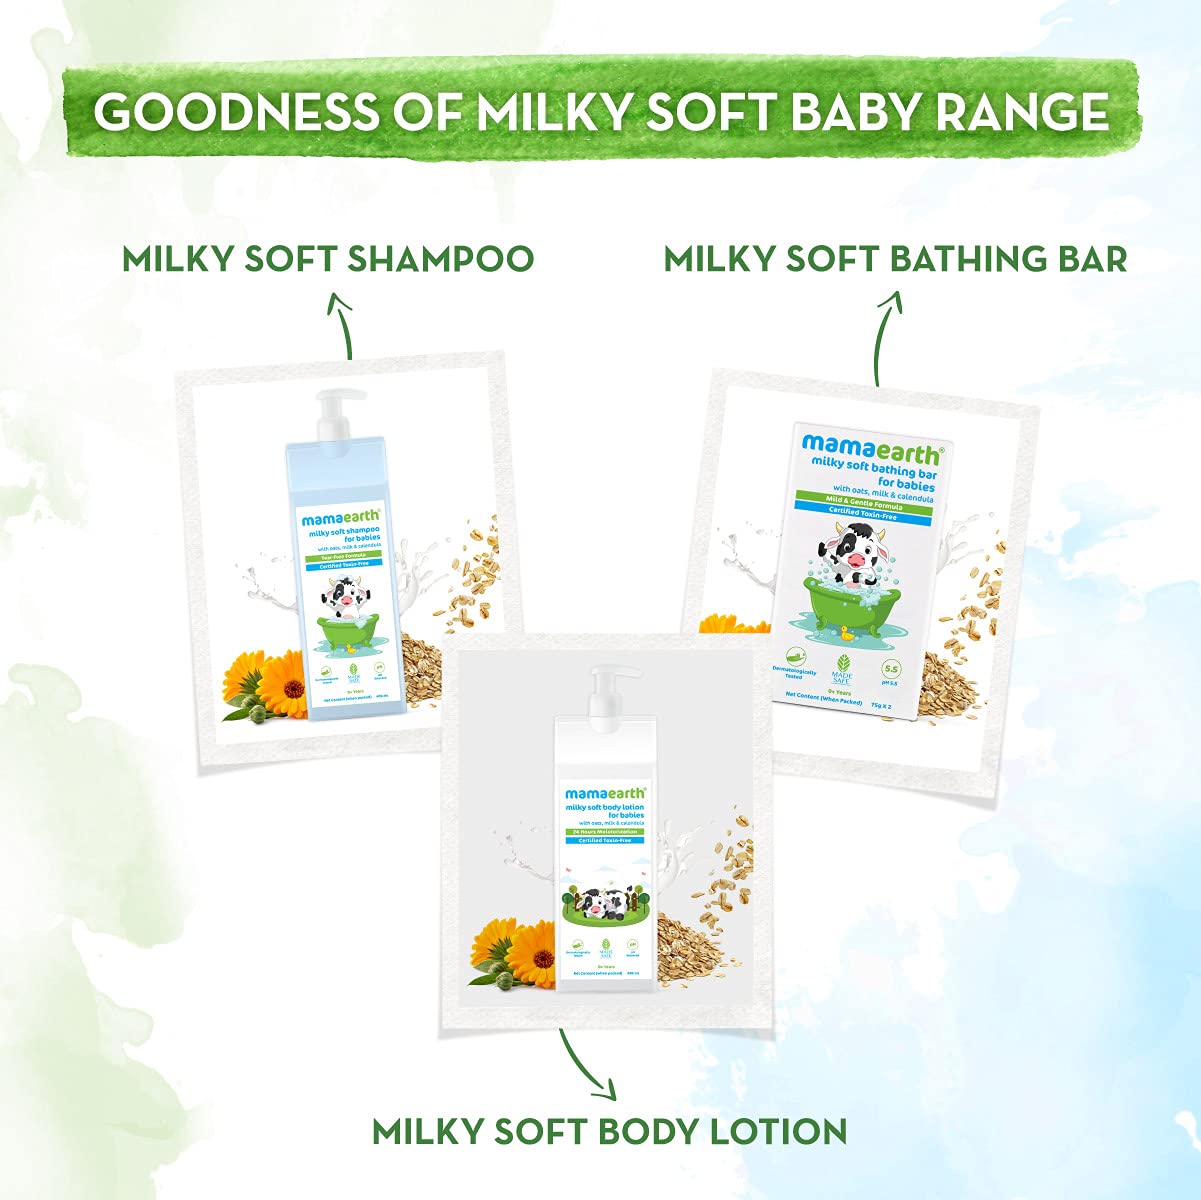 Mamaearth Milky Soft Bathing Bar for Babies with Oats, Milk & Calendula Pack of 2 (75g x 2)